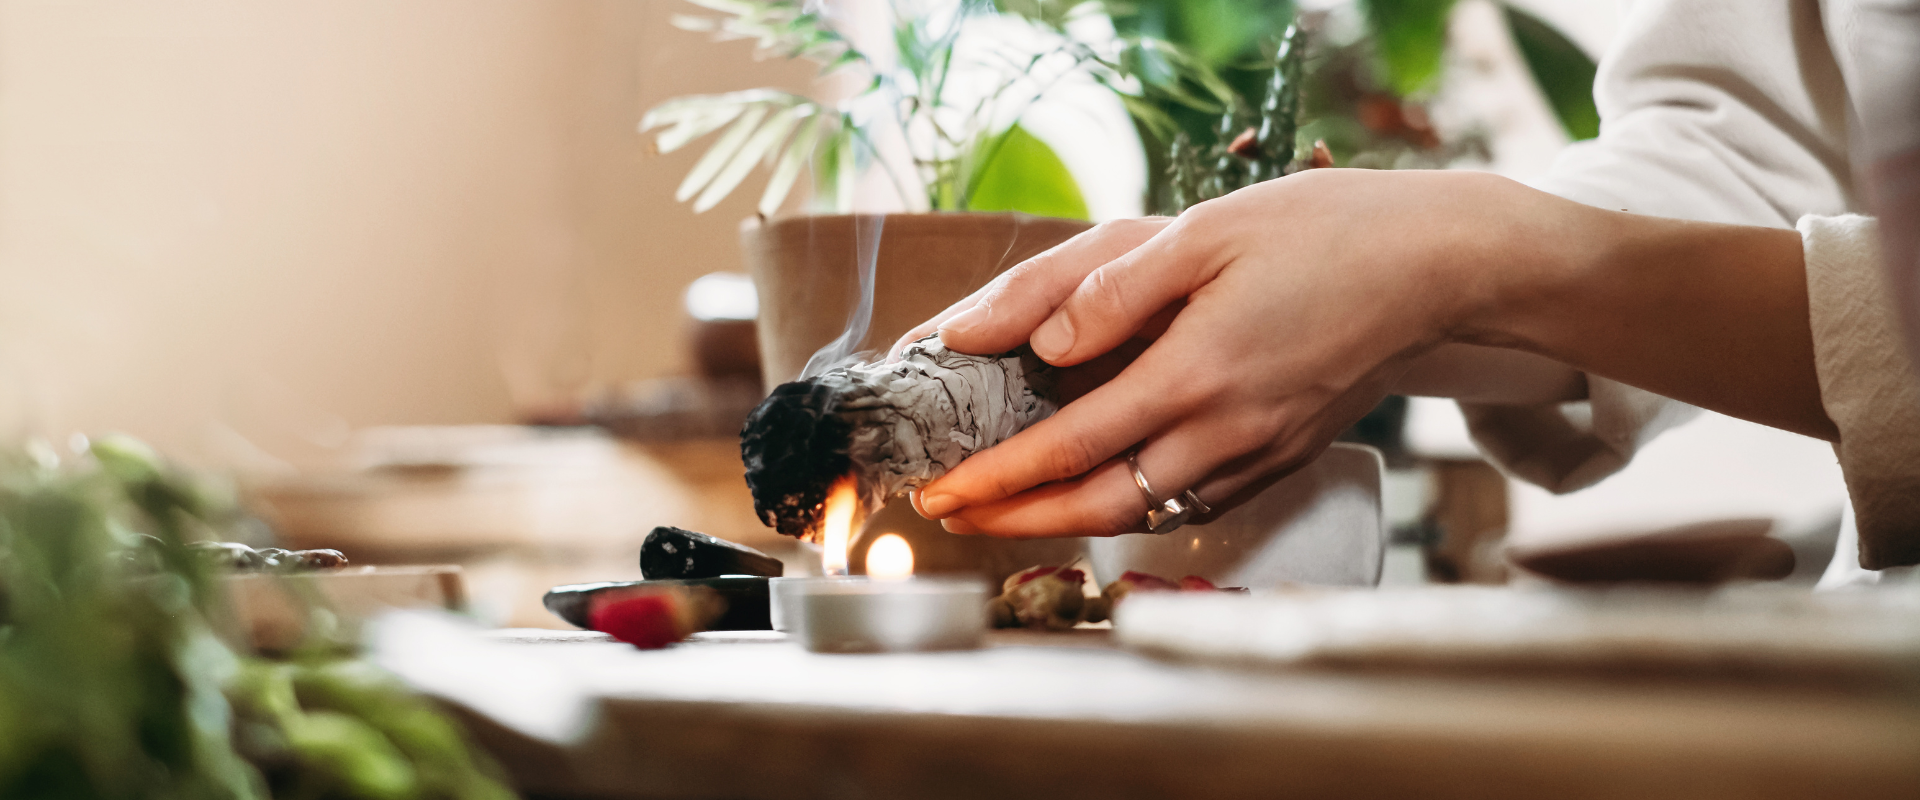 Smudging 101: How to Sage Your Home, Office, or Living Space